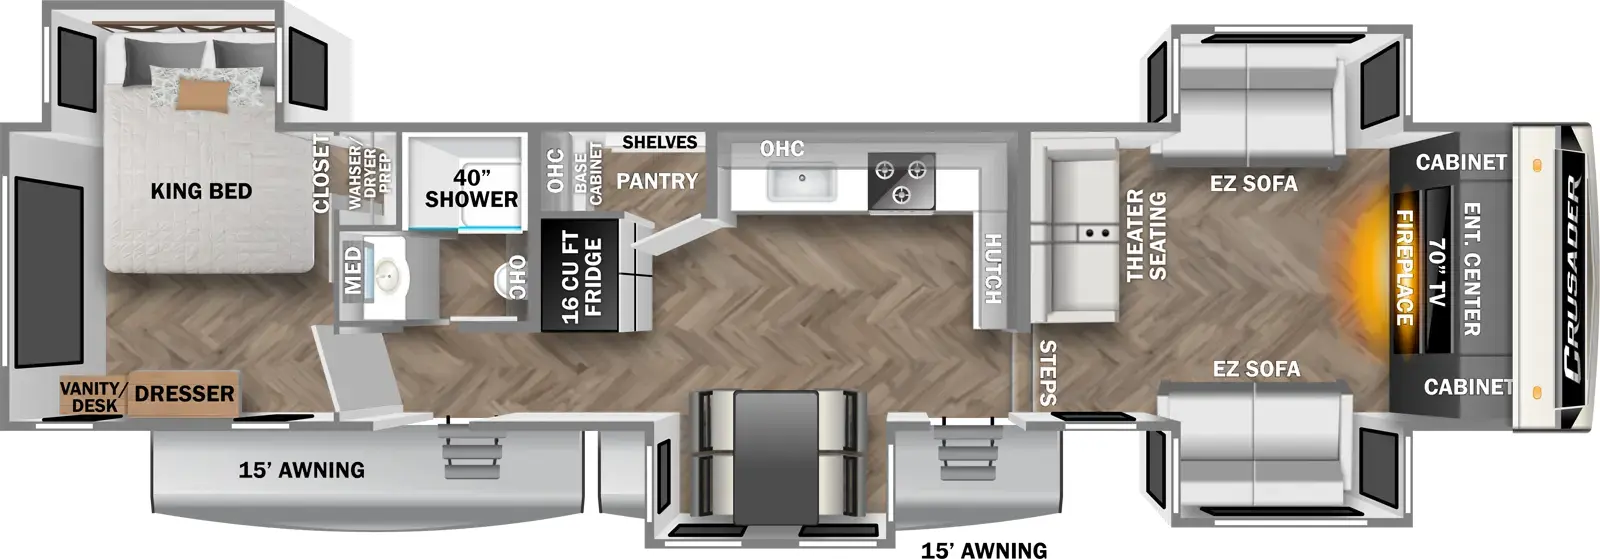 The 375FLS has four slideouts and two entries. Interior layout front to back: front entertainment center with TV, fireplace below, cabinets on each side, theater seating across from it, and opposing EZ sofa slideouts; steps down to kitchen and entry; door side free-standing dinette slideout; hutch along inner wall wraps to door side with kitchen counter, cooktop, sink, overhead cabinet, pantry with shelves, base cabinet and overhead cabinet, and wraps to refrigerator on opposite side; off-door side full bathroom with medicine cabinet, and second entry; rear bedroom with off-door side king bed slideout, closet with washer and dryer prep, and door side dresser with vanity/desk.